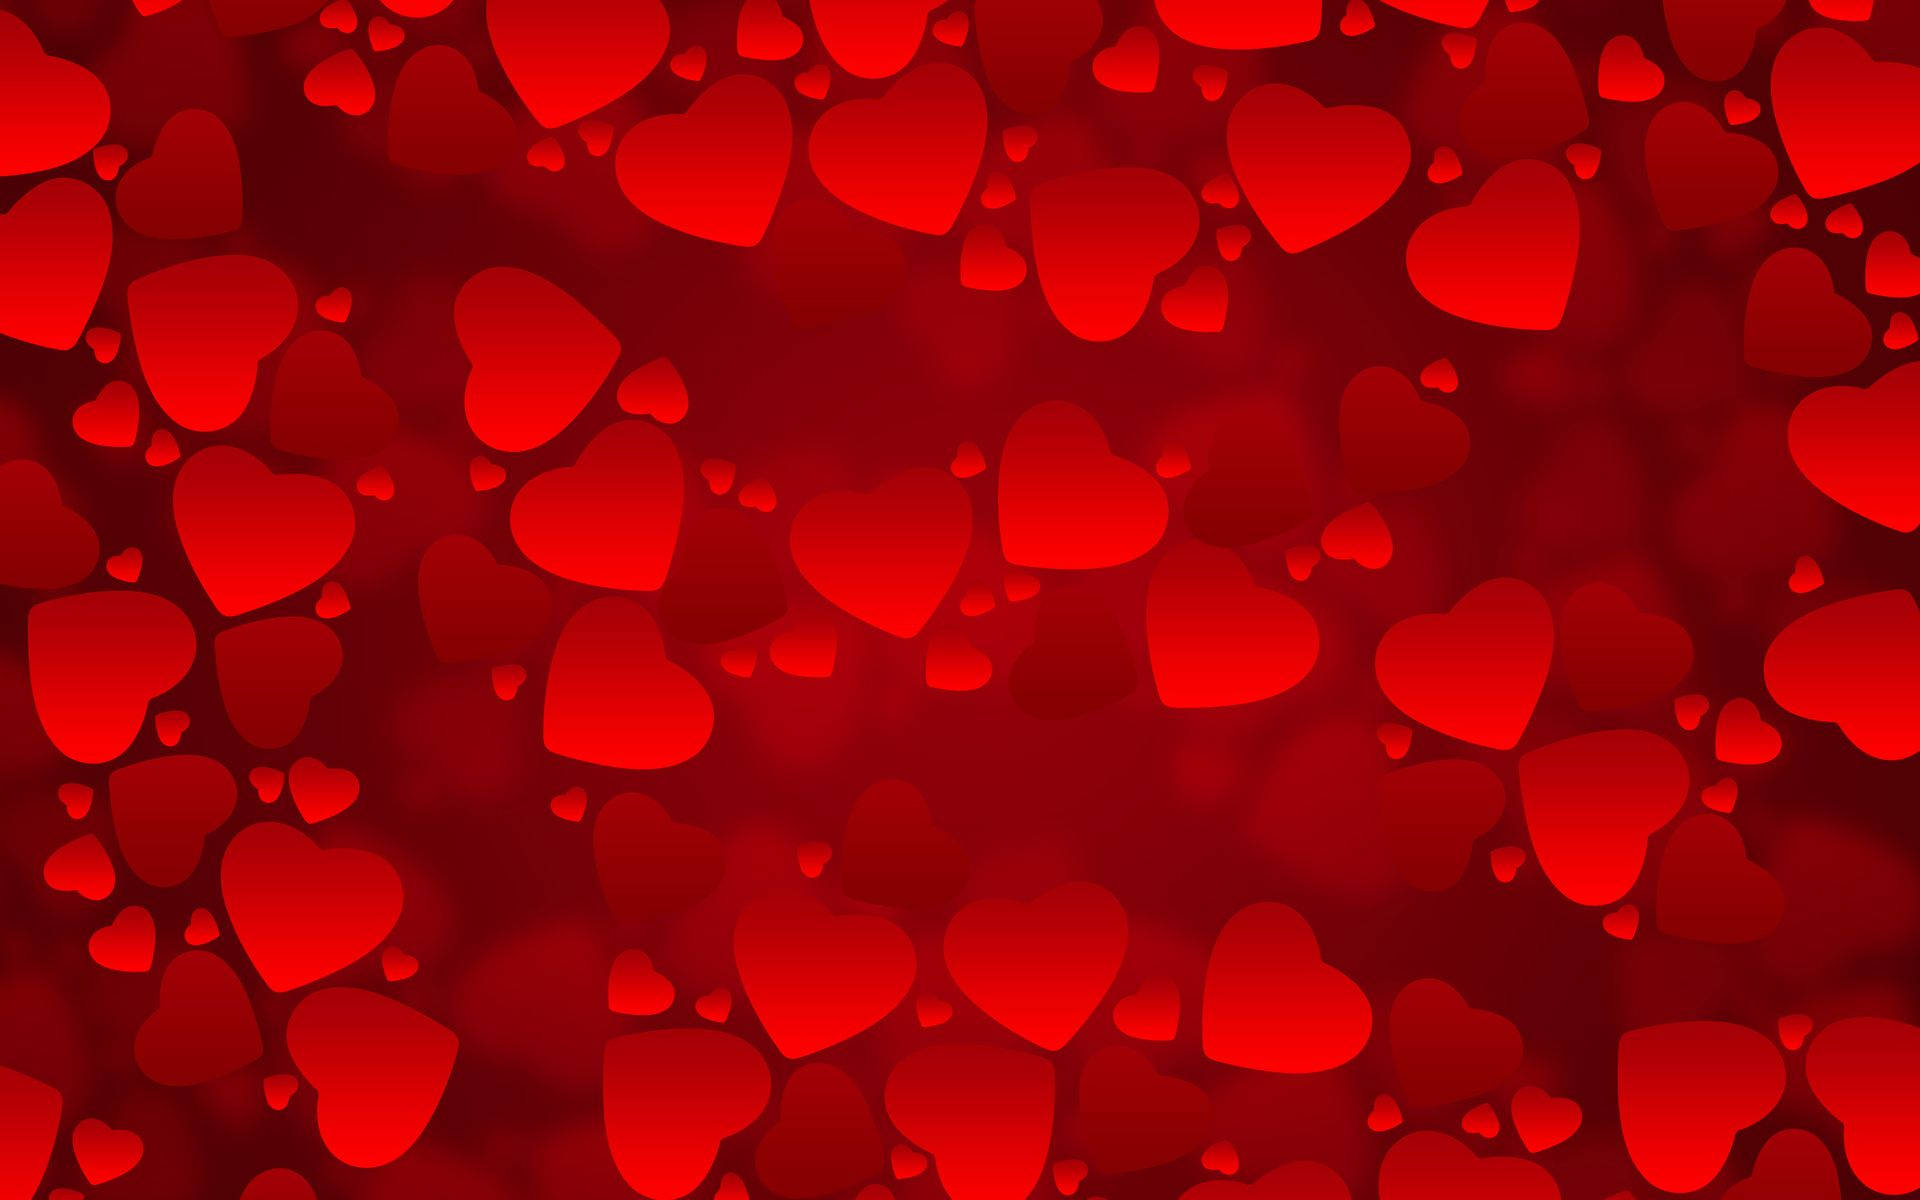 Red Hearts Of Love Floating Wallpaper